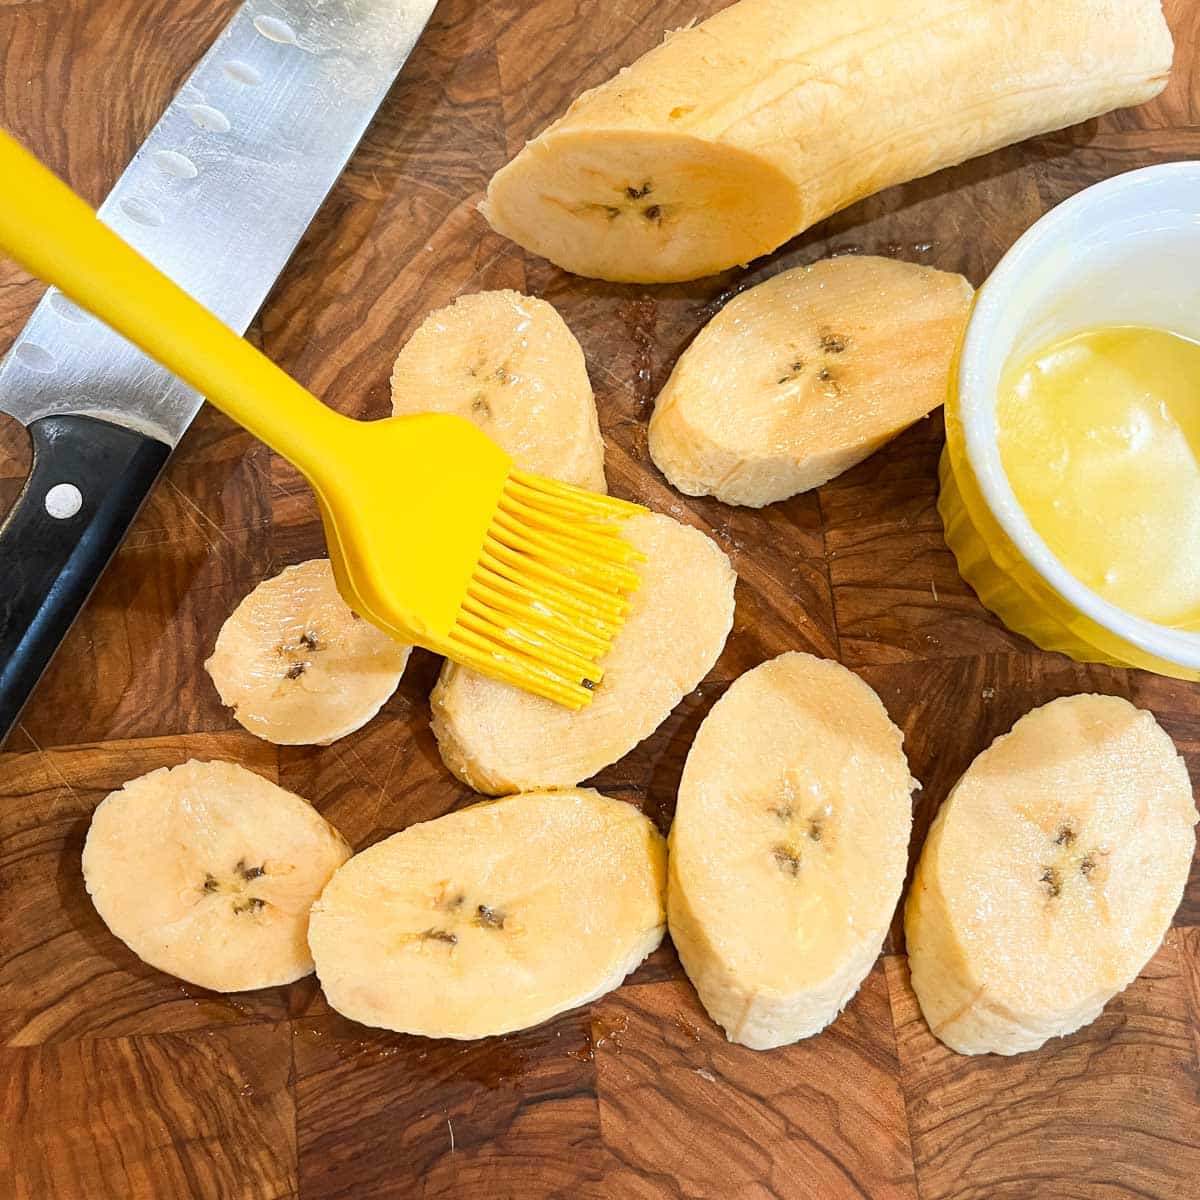 brushing ghee on plantains after slicing